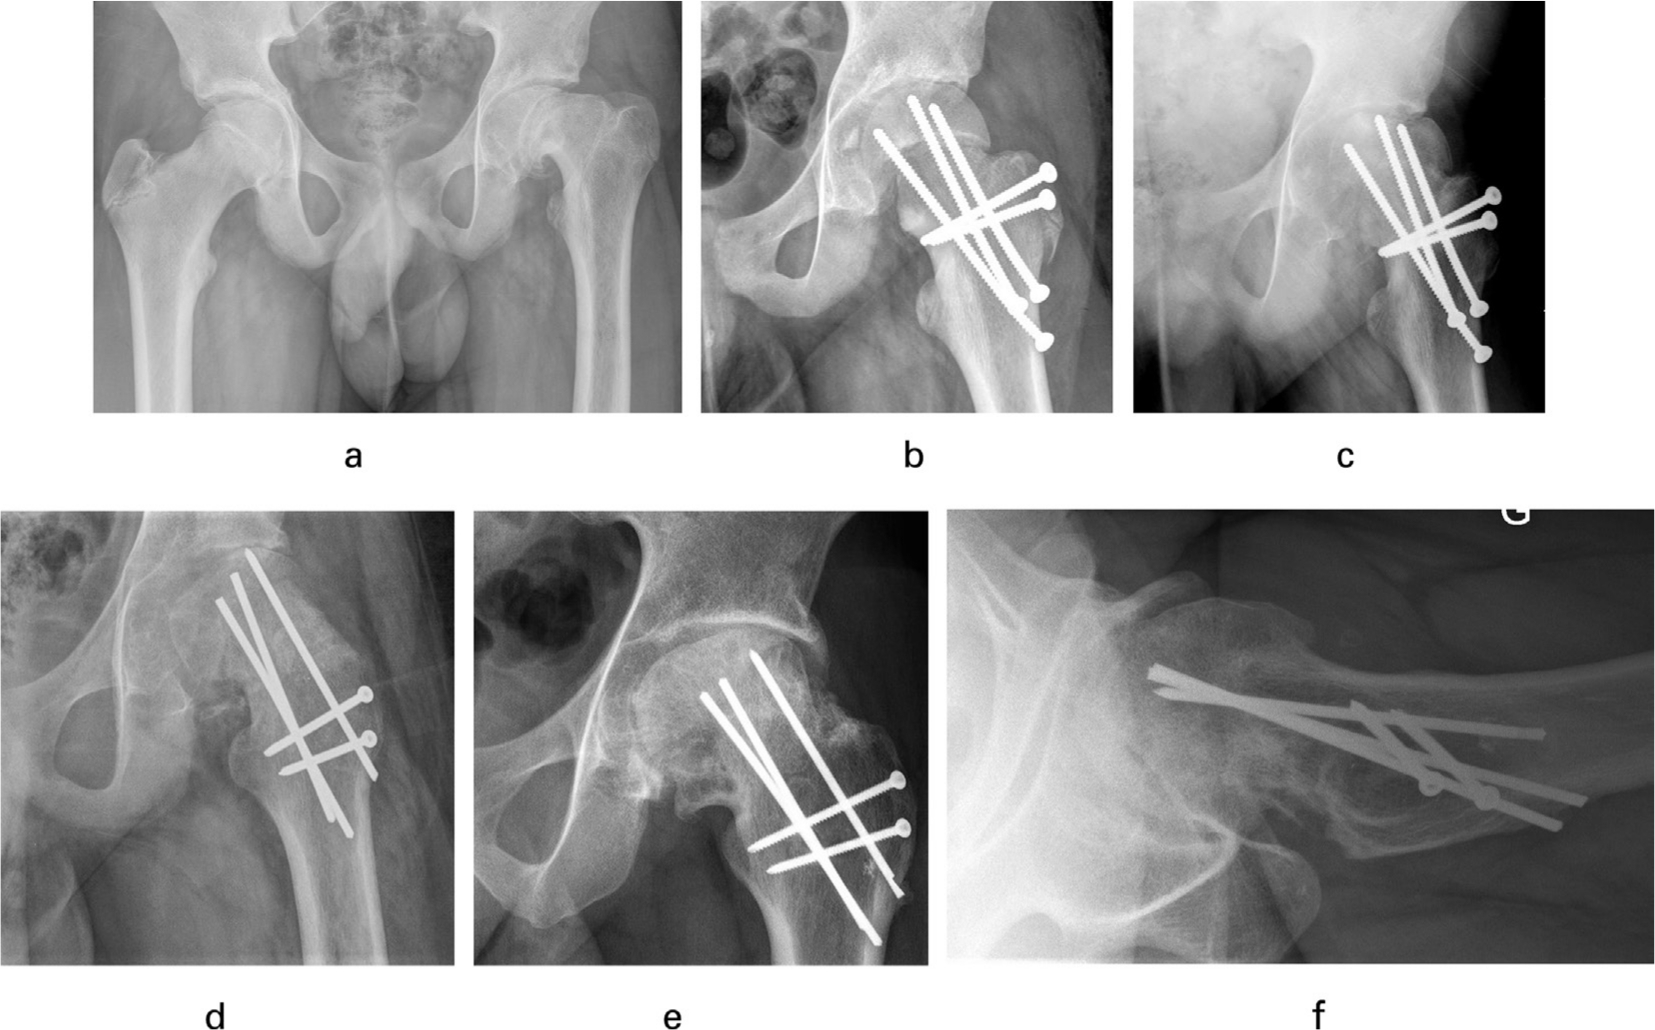 Fig. 2 
          a) 13.7 years old patient presenting with a 1.5-year history of left knee pain showing a severe chronic slip. b) Postoperative radiograph showing overcorrection with severe valgus position of the epiphysis and concomitant lateralization of the head. The head shows radiotransparency as sign of pre-existing AVN in its superior segment. c) Shows AVN with lateral femoral head subluxation at 12 weeks. d) Anteroposterior radiograph after the second hip dislocation with varisation of the epiphysis to re-center the hip and rotate the necrotic parts of the femoral head out of the weight-bearing area. e) Situation at 9.5 years. f) The femoral head is re-centered in both planes and the necrotic parts of the head at least partially remodeled. The subjective outcome is good (mHHS 95, HOOS 97.5, MdA 16, UCLA 10).
        